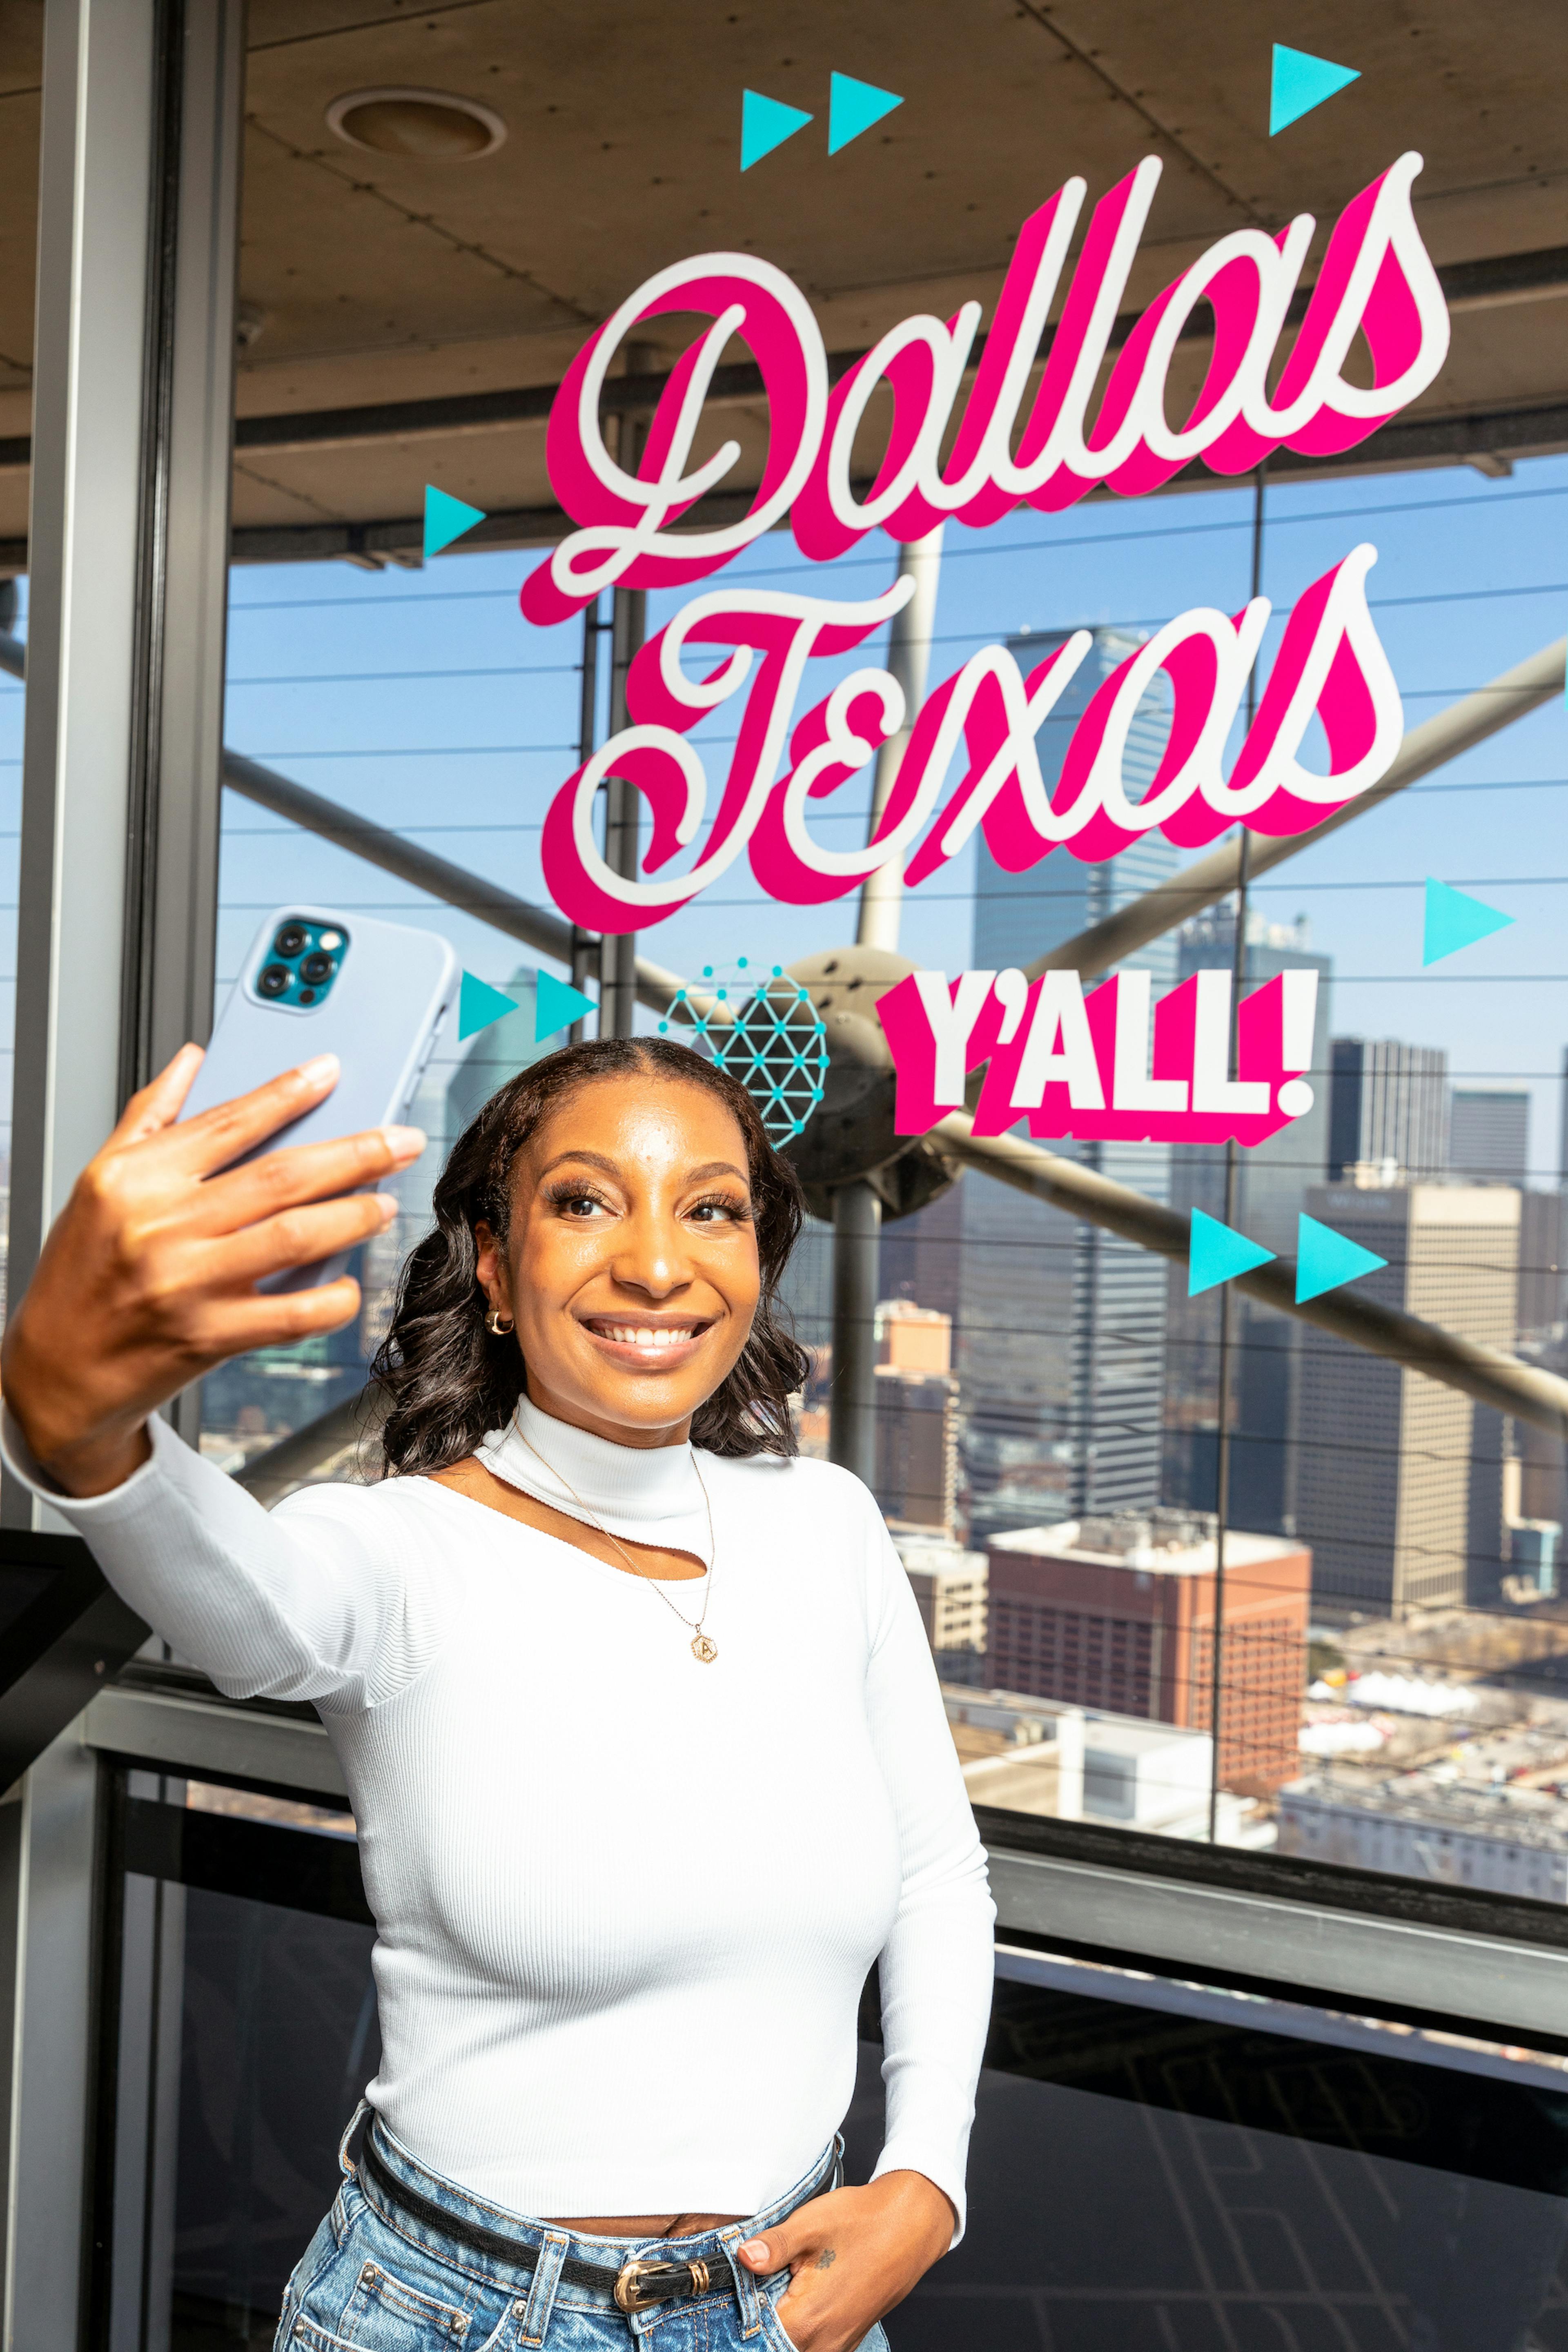 woman taking a selfie at Reunion Tower in front of a window decal that reads "Dallas Texas, Y'all!"